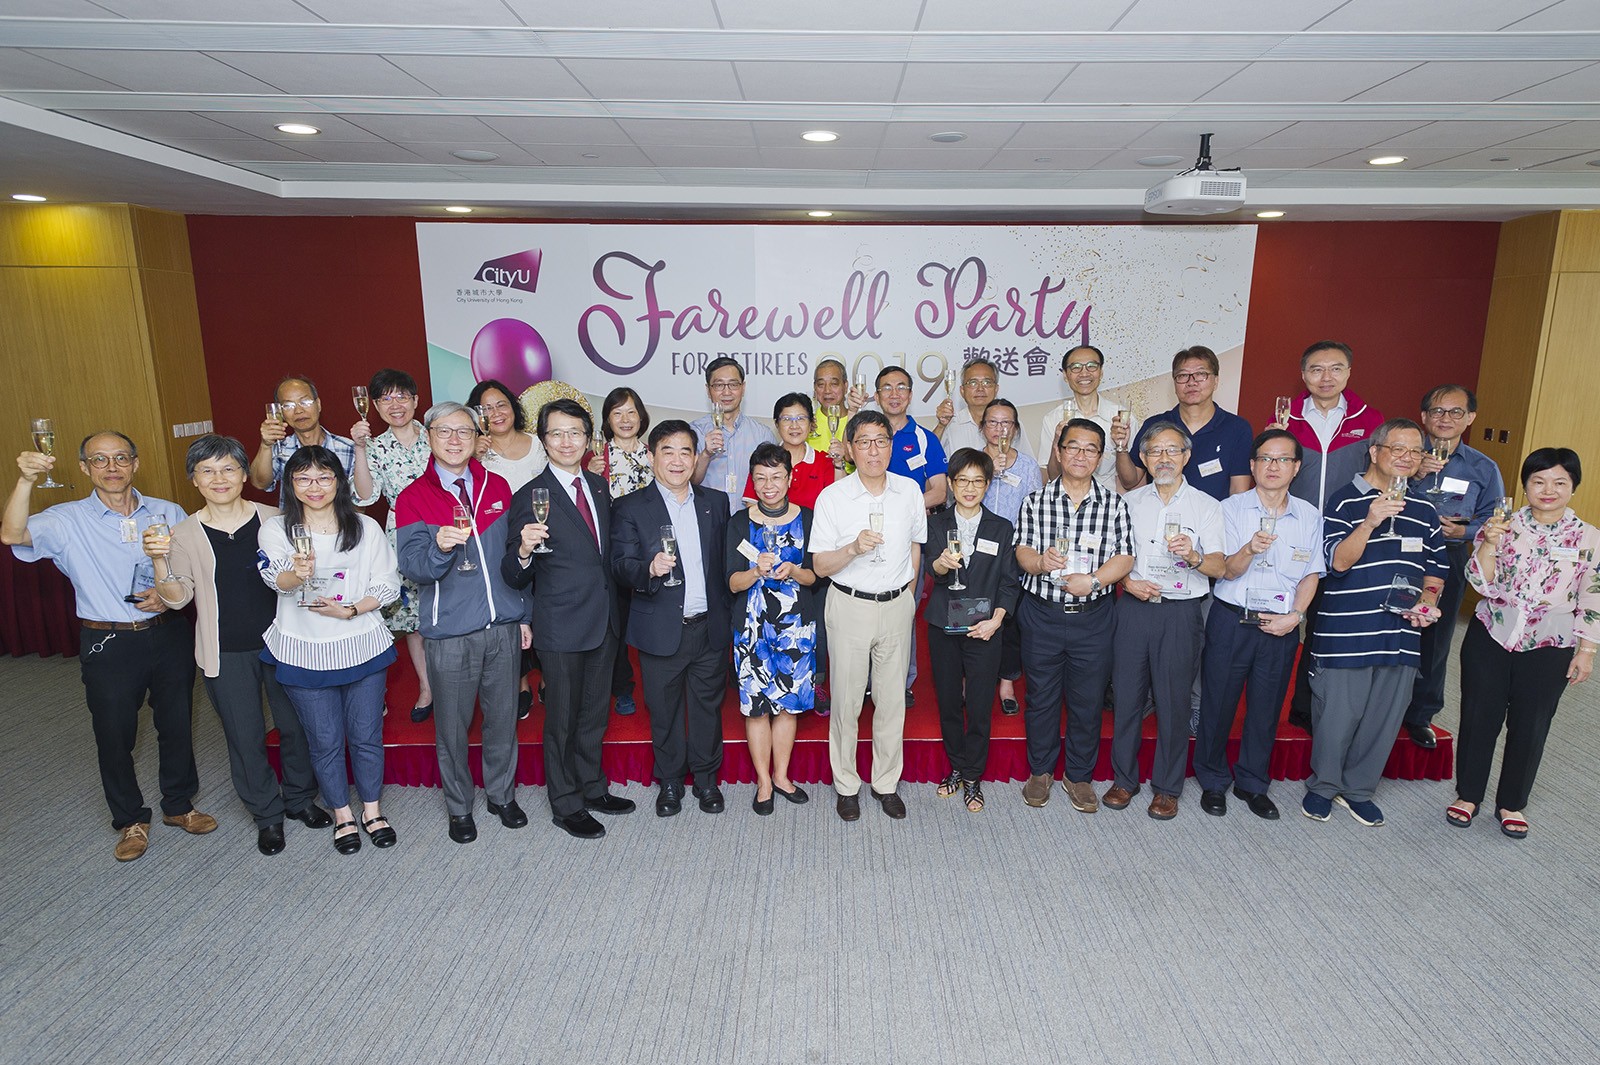  Senior management and retirees of CityU at the farewell party.